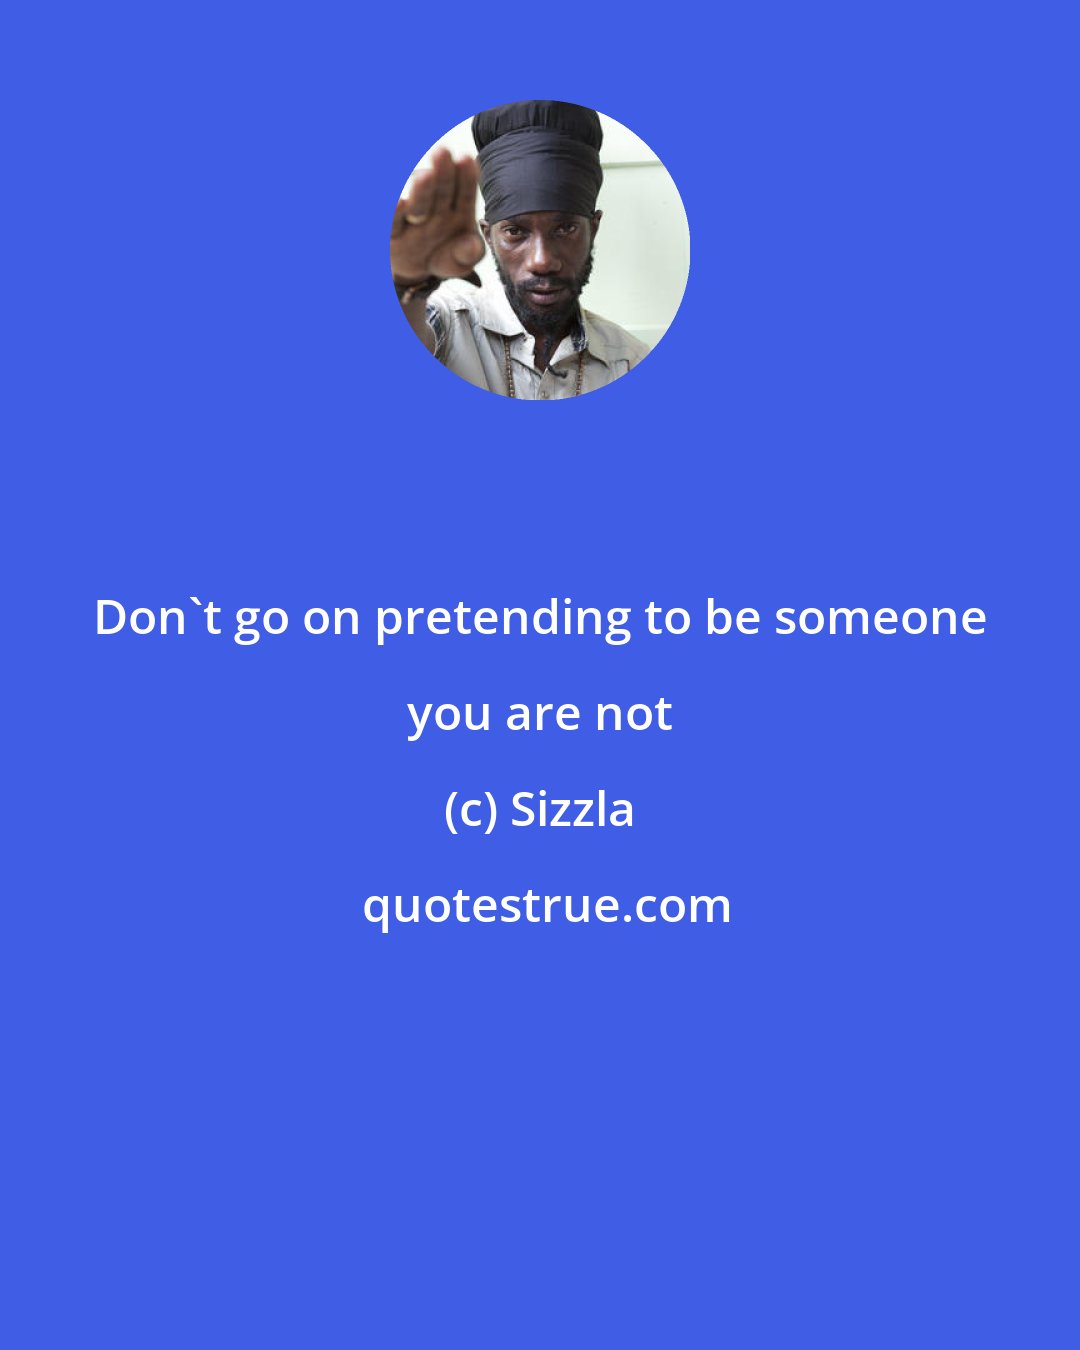 Sizzla: Don't go on pretending to be someone you are not